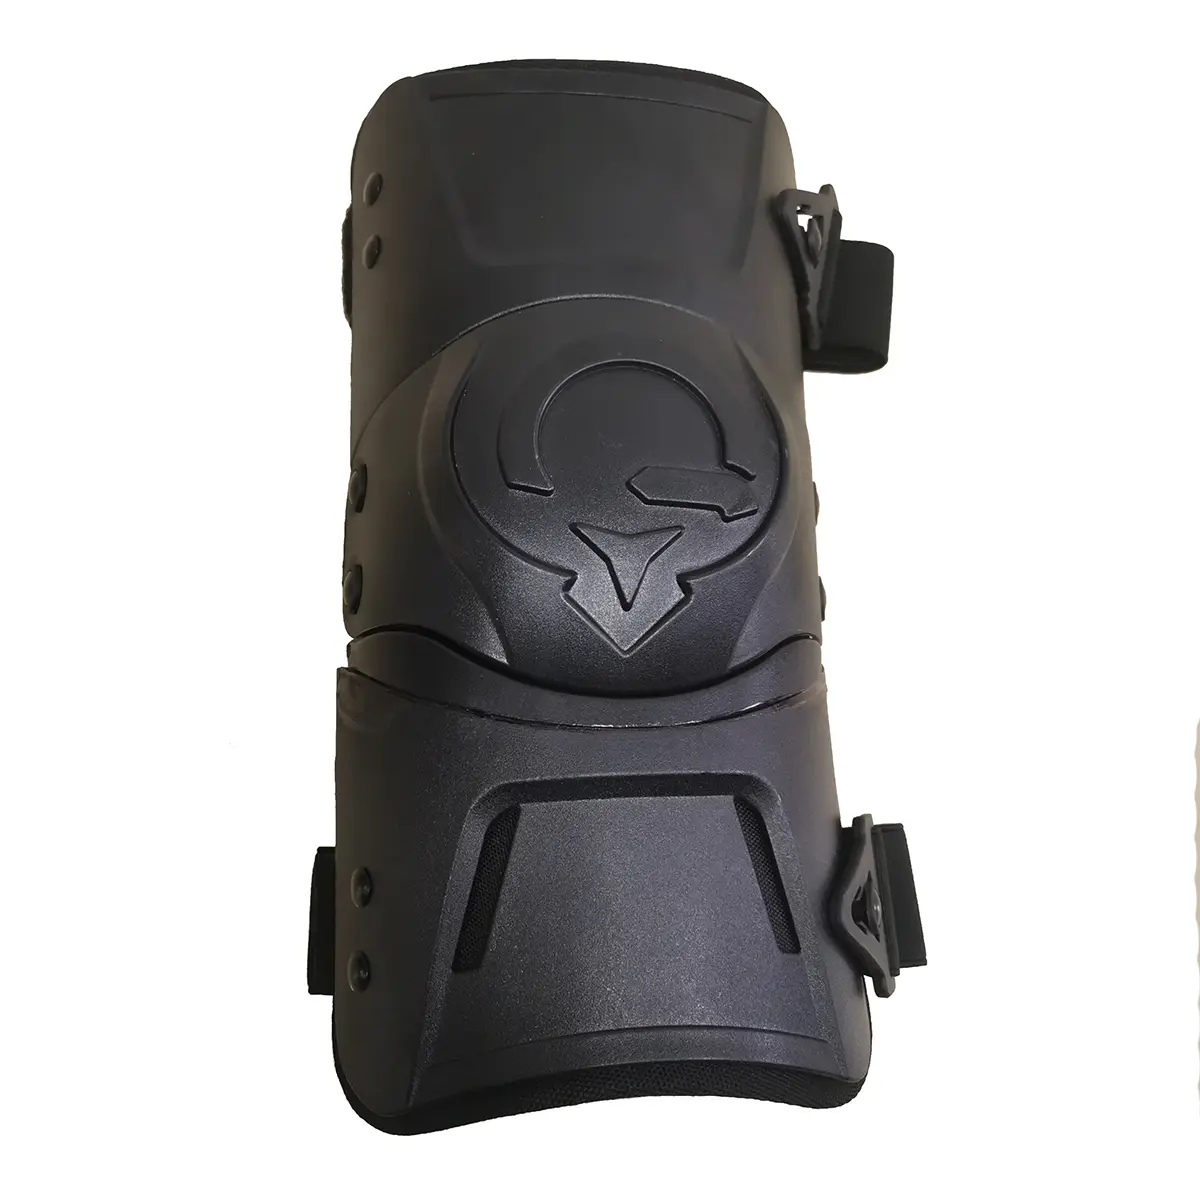 Protect your knees and elbows with the best protectors on the market